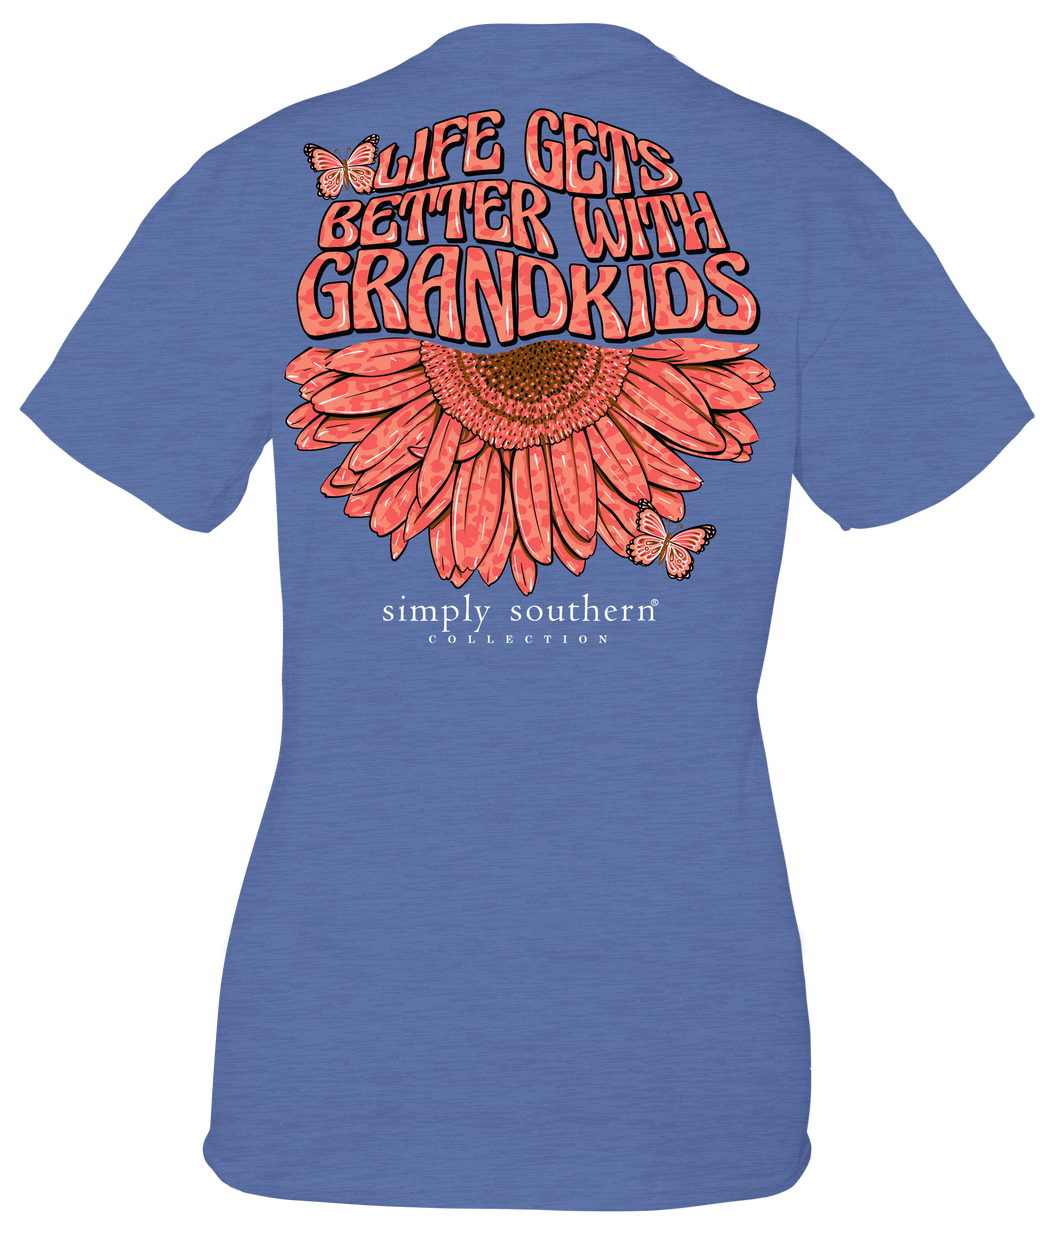 Simply Southern LIFE GETS BETTER WITH GRANDKIDS Short Sleeve T-Shirt